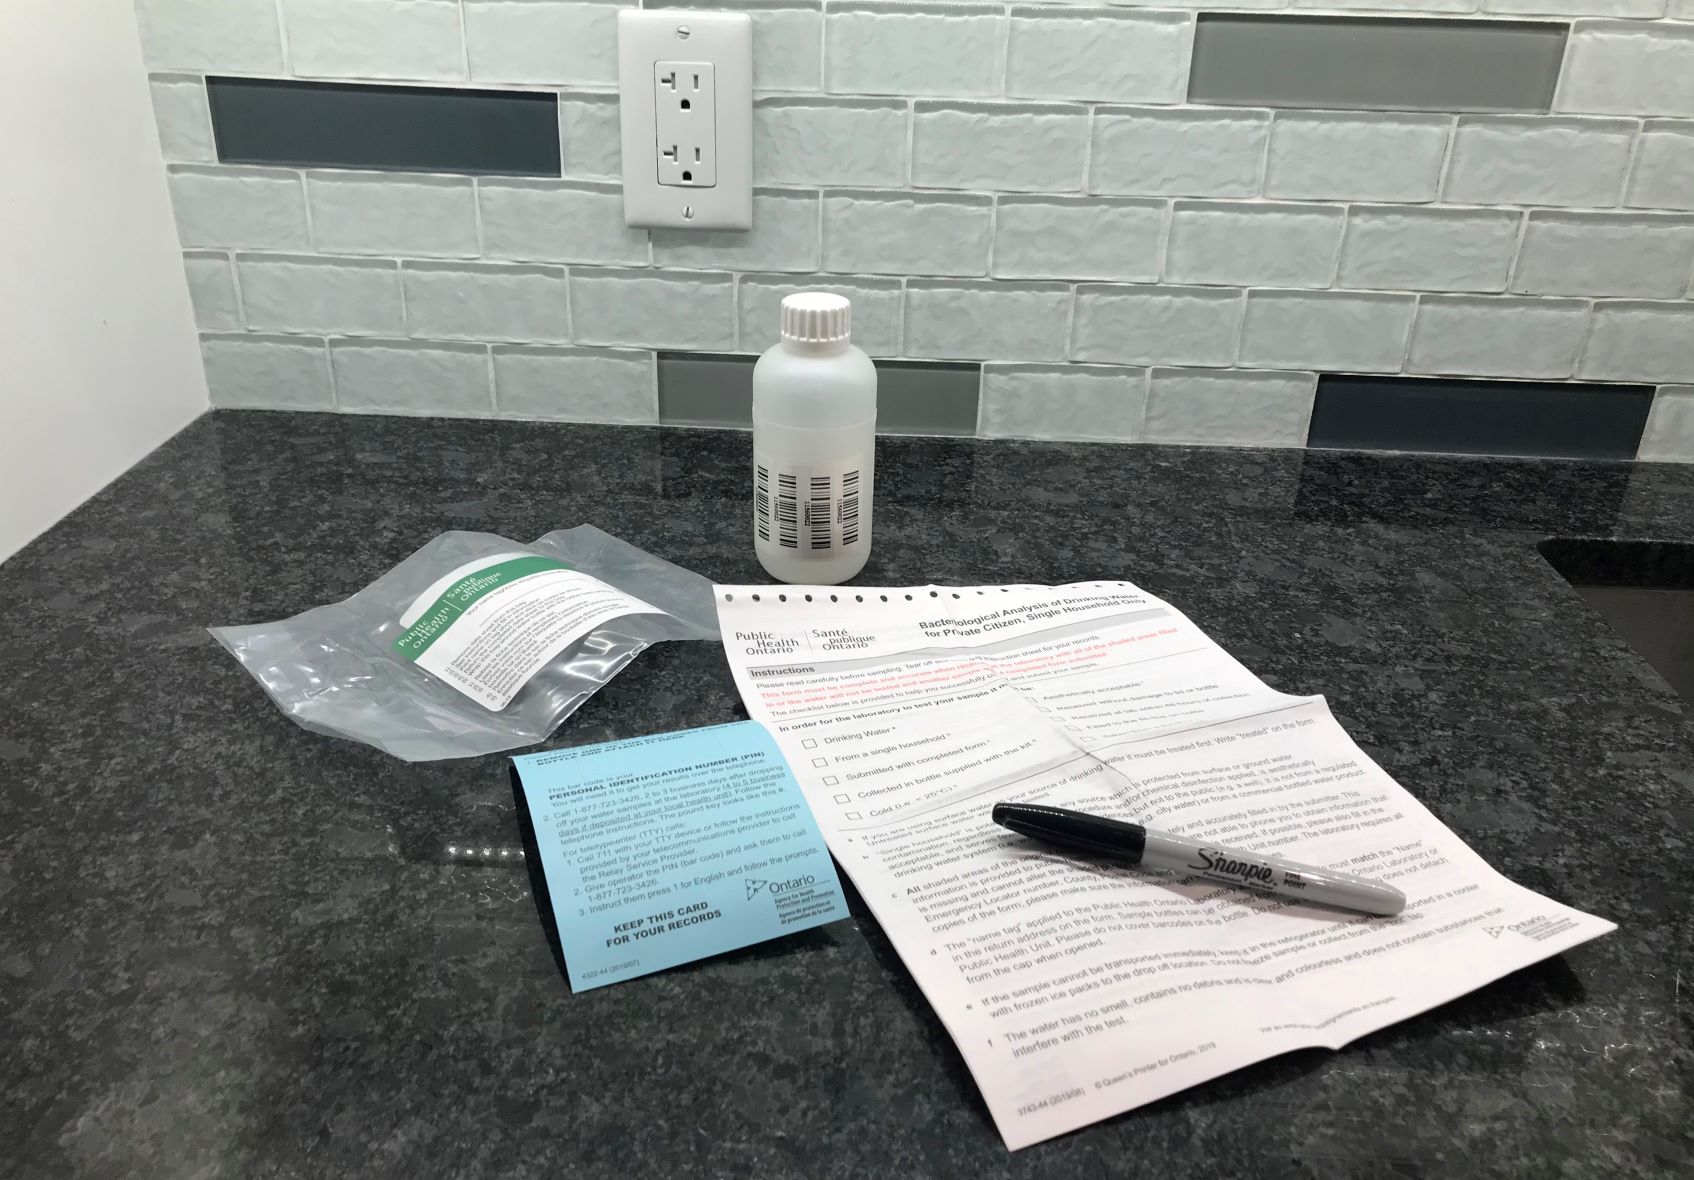 A typical private water well sample kit – sample bottle, a form and instruction paper and a pen - on a countertop